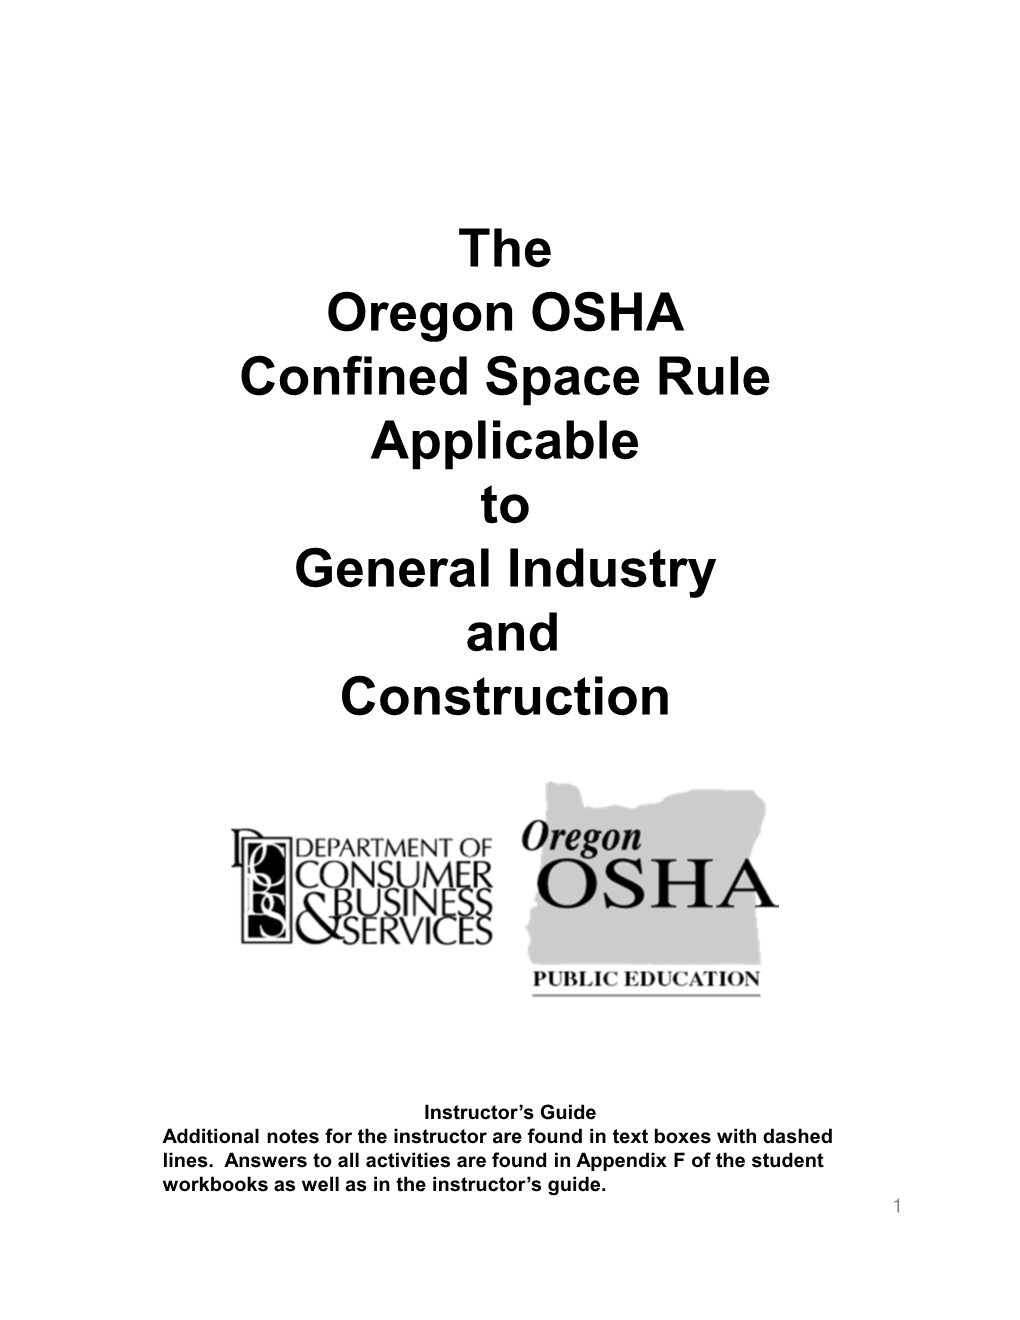 The Oregon OSHA Confined Space Rule Applicable to General Industry and Construction